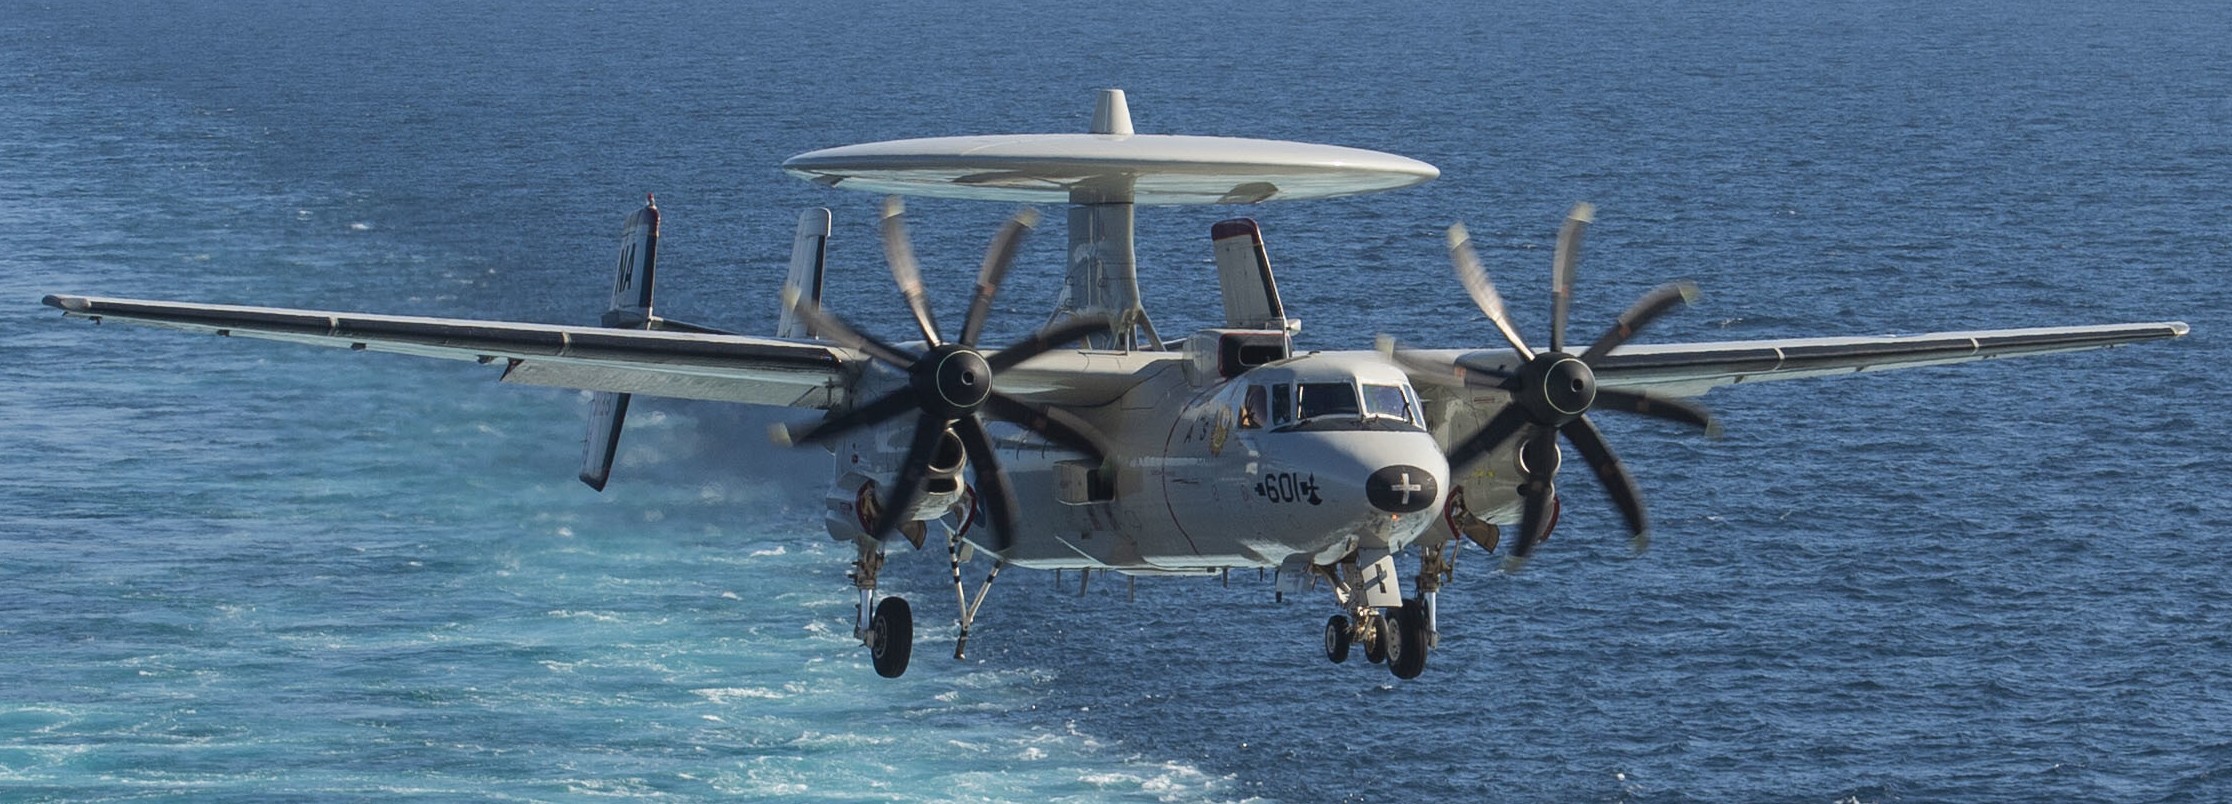 vaw-116 sun kings airborne command control squadron carrier early warning cvw-17 uss nimitz cvn-68 97